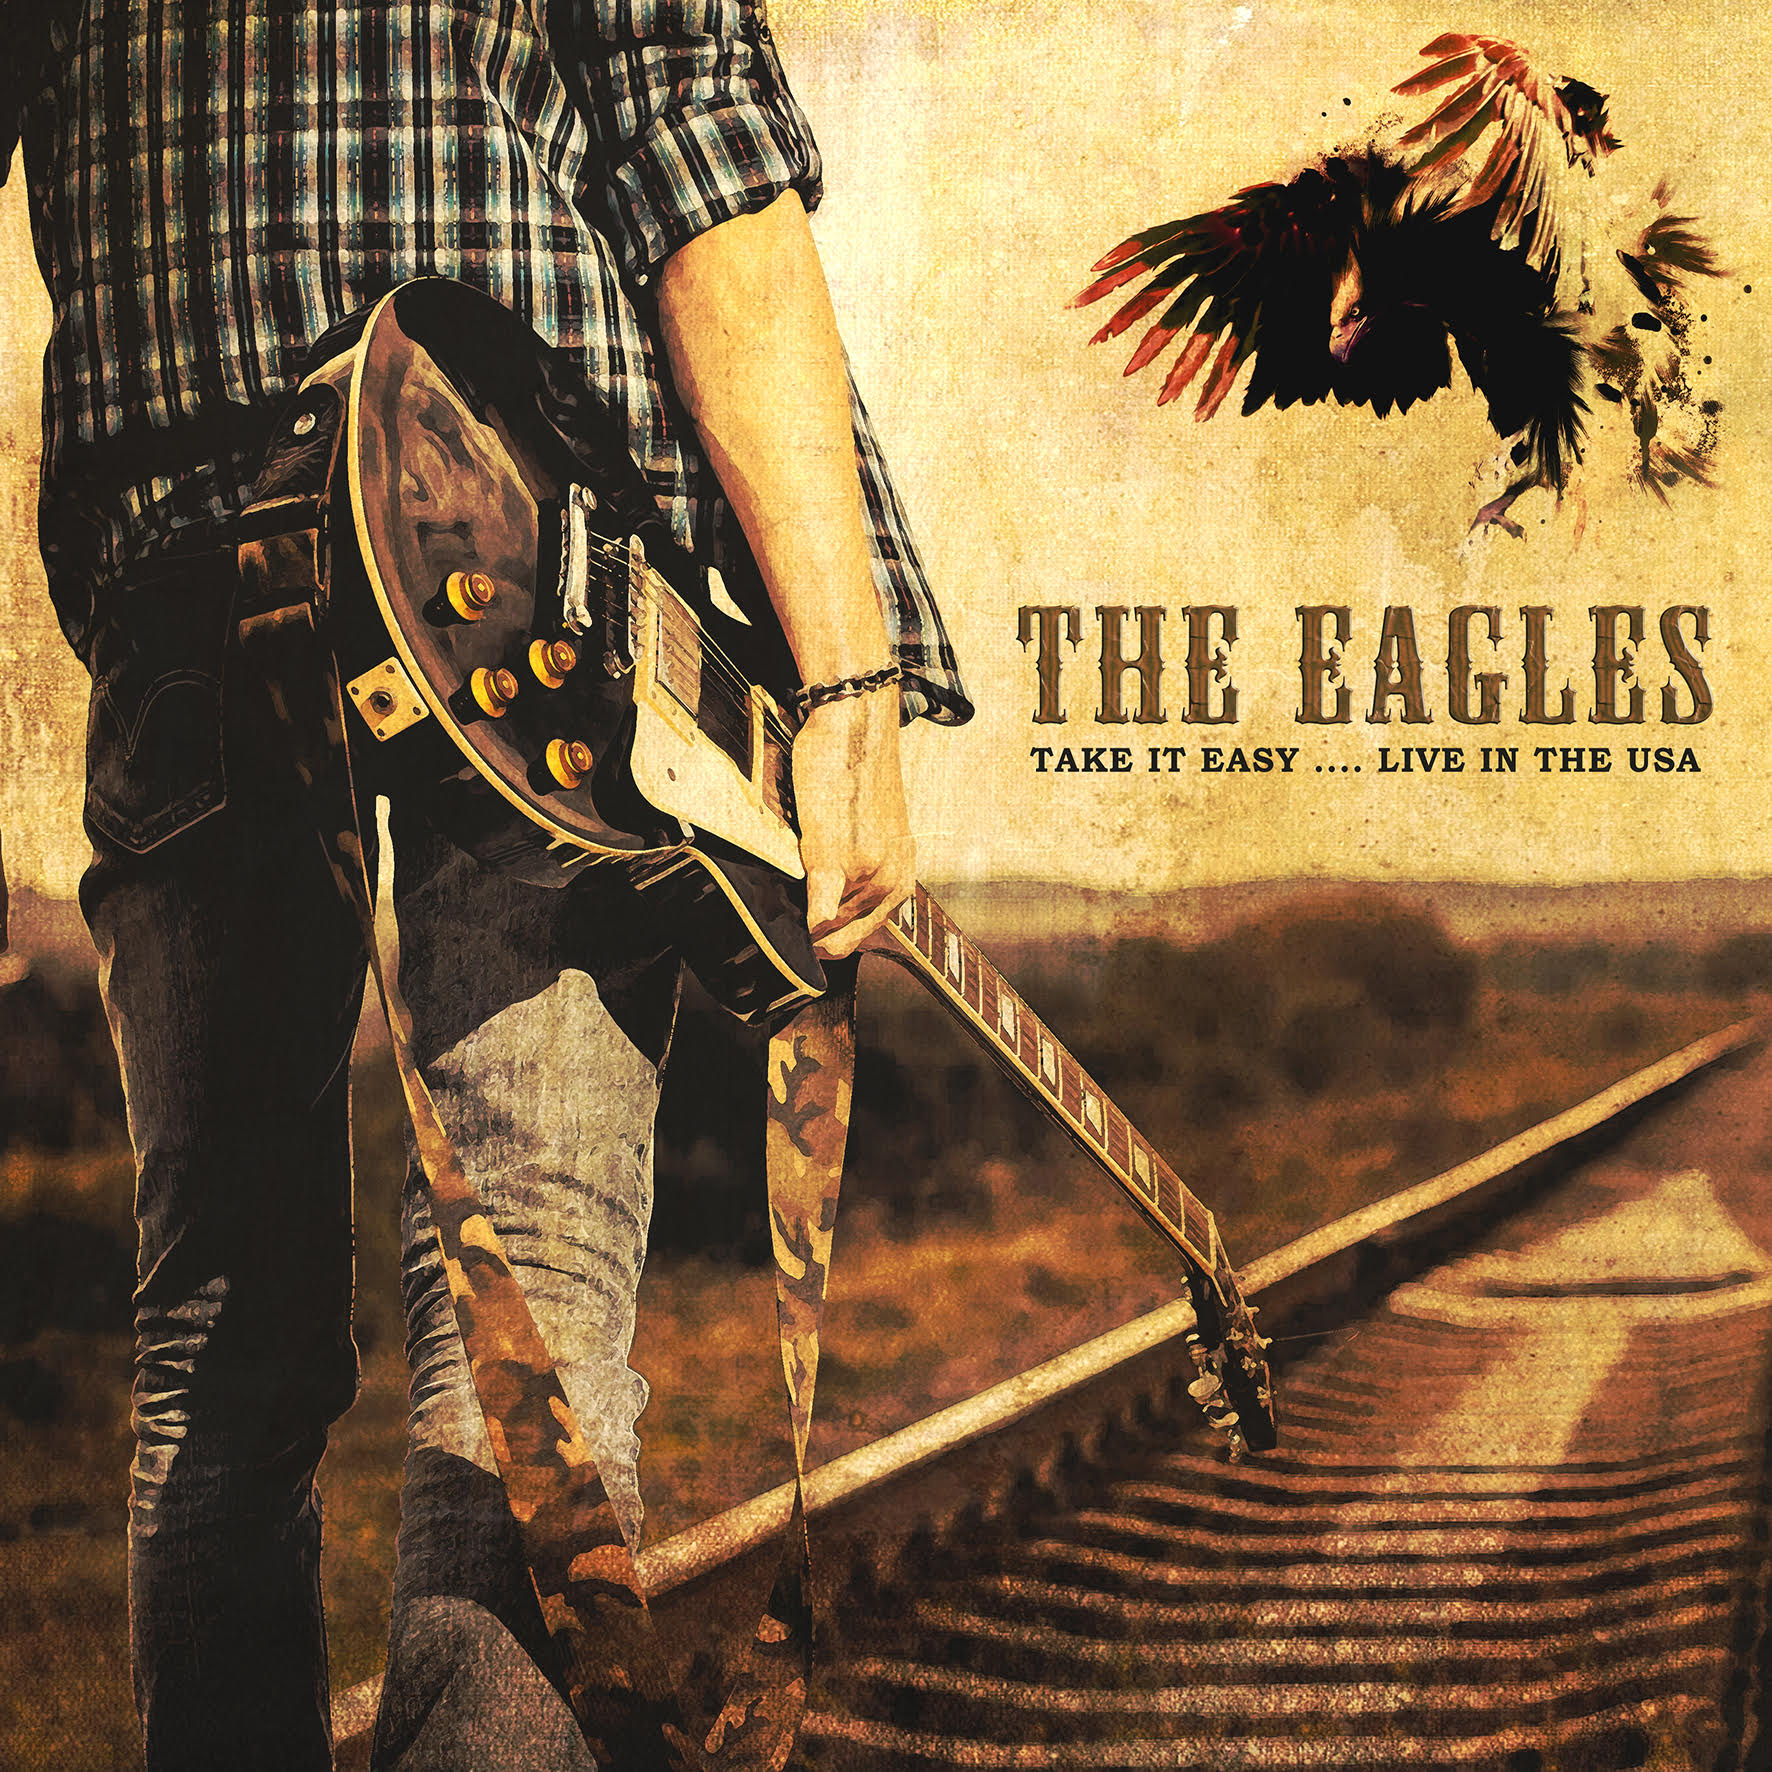 Get Over It (Live) - Song Download from The Eagles - Unplugged